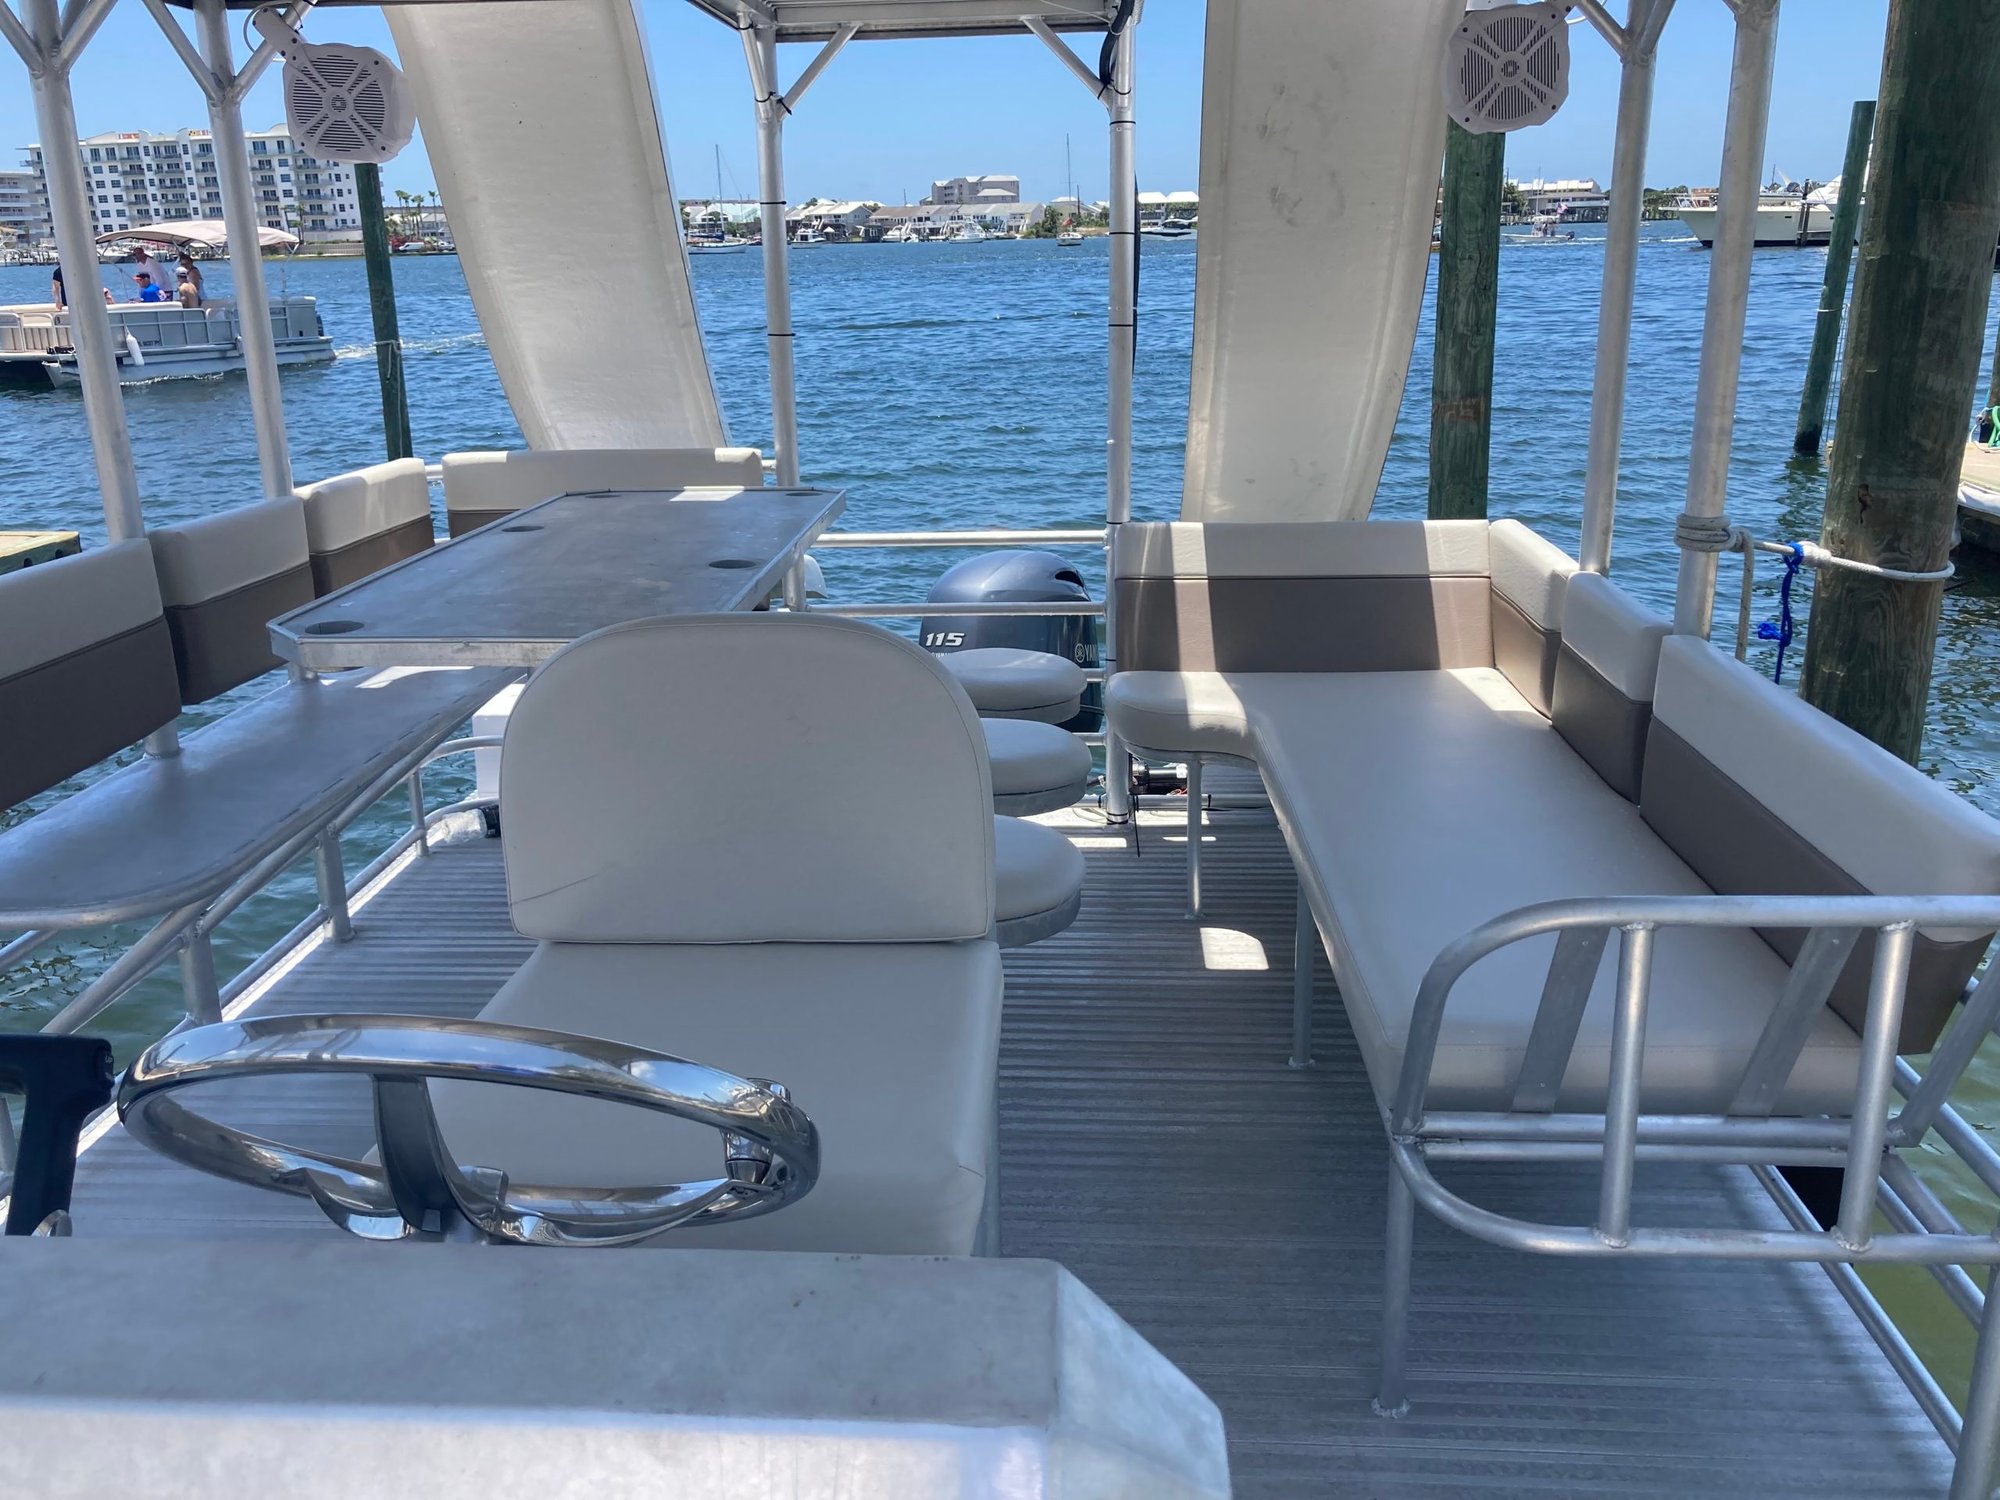 additional seating on a double decker pontoon boat with two slides in water in destin florida